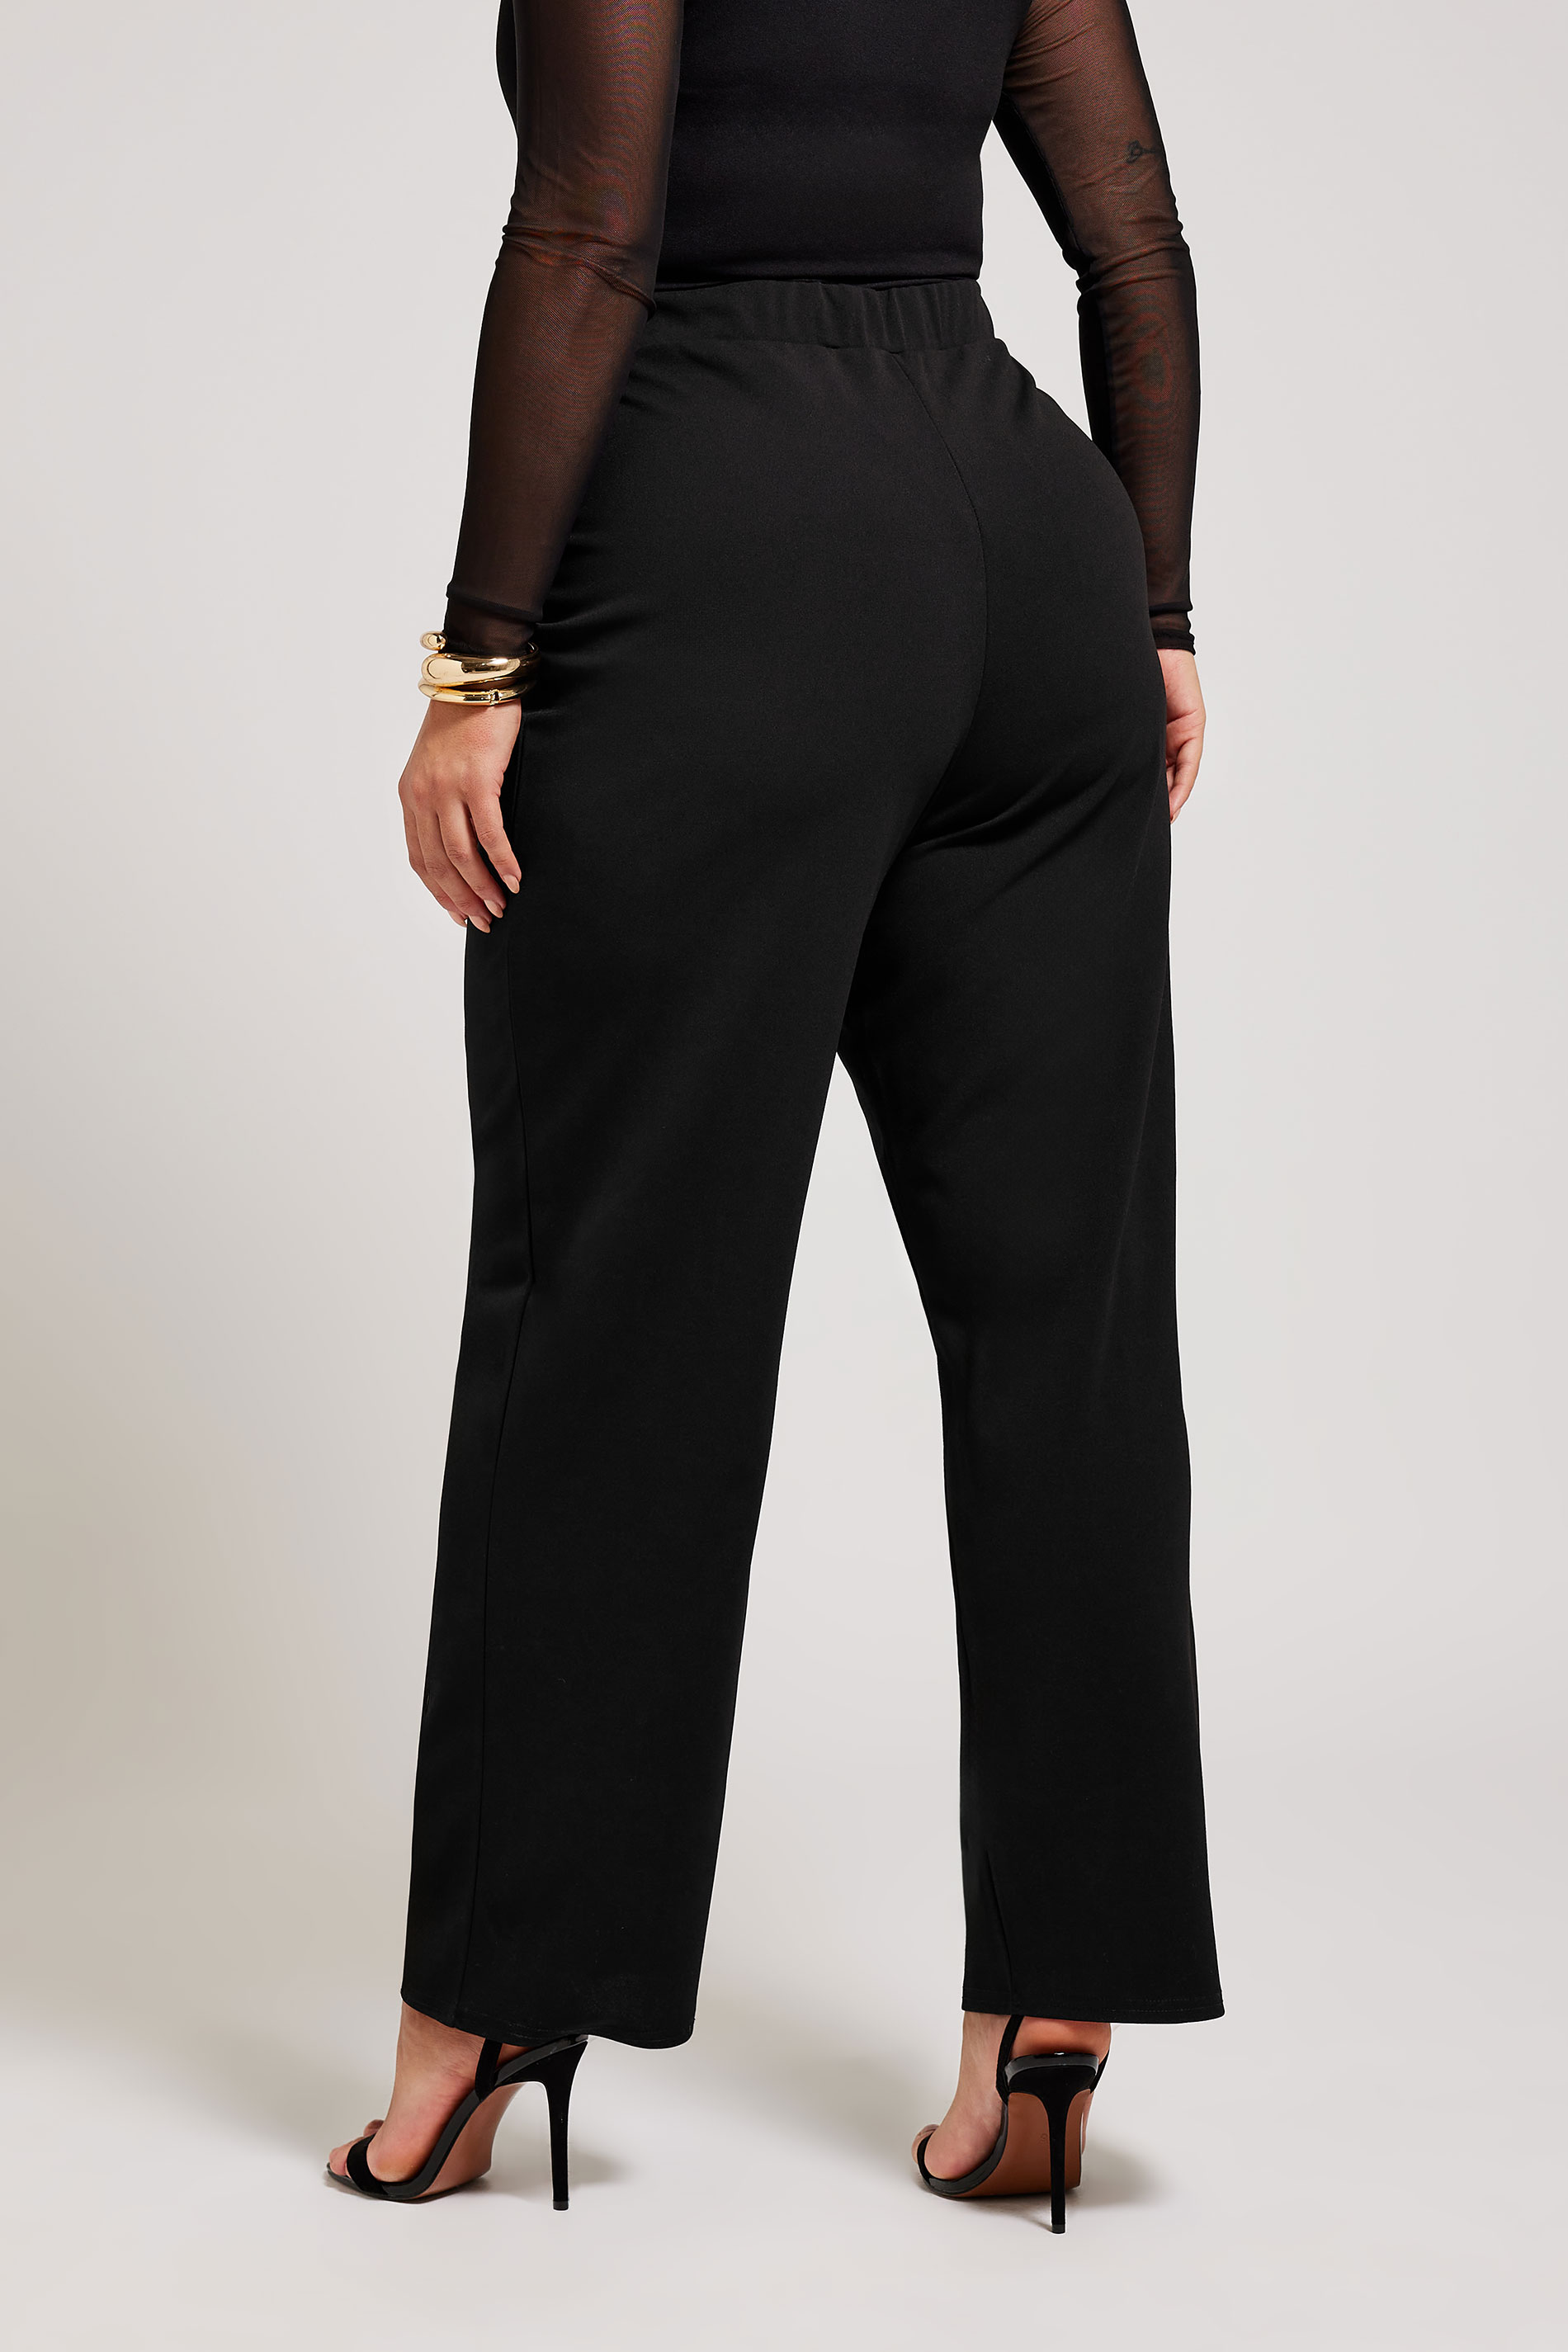 YOURS LONDON Plus Size Black Button Detail Trousers | Yours Clothing 3